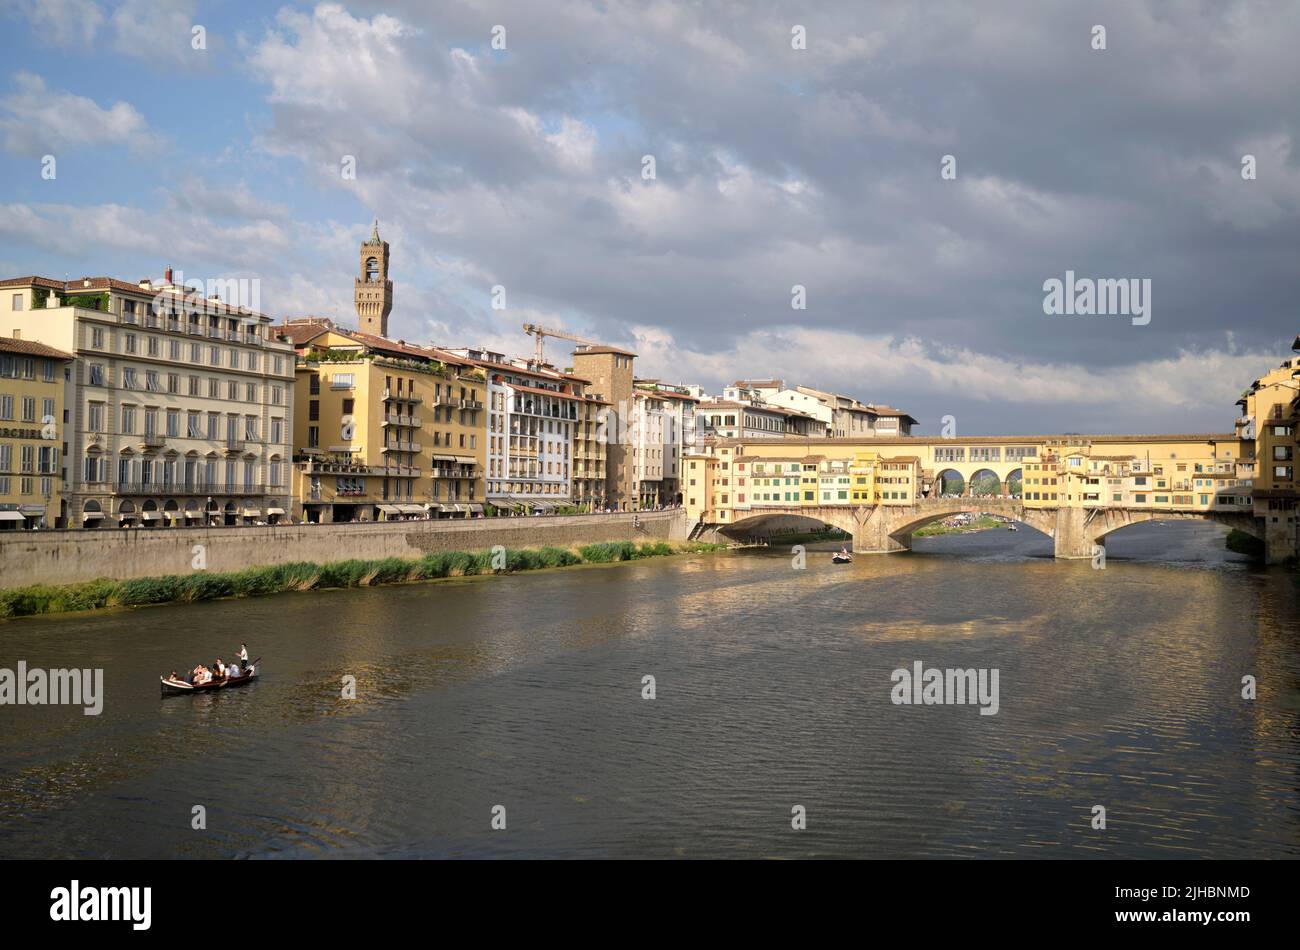 River Arno and the Ponte Vecchio in Florence Italy Stock Photo